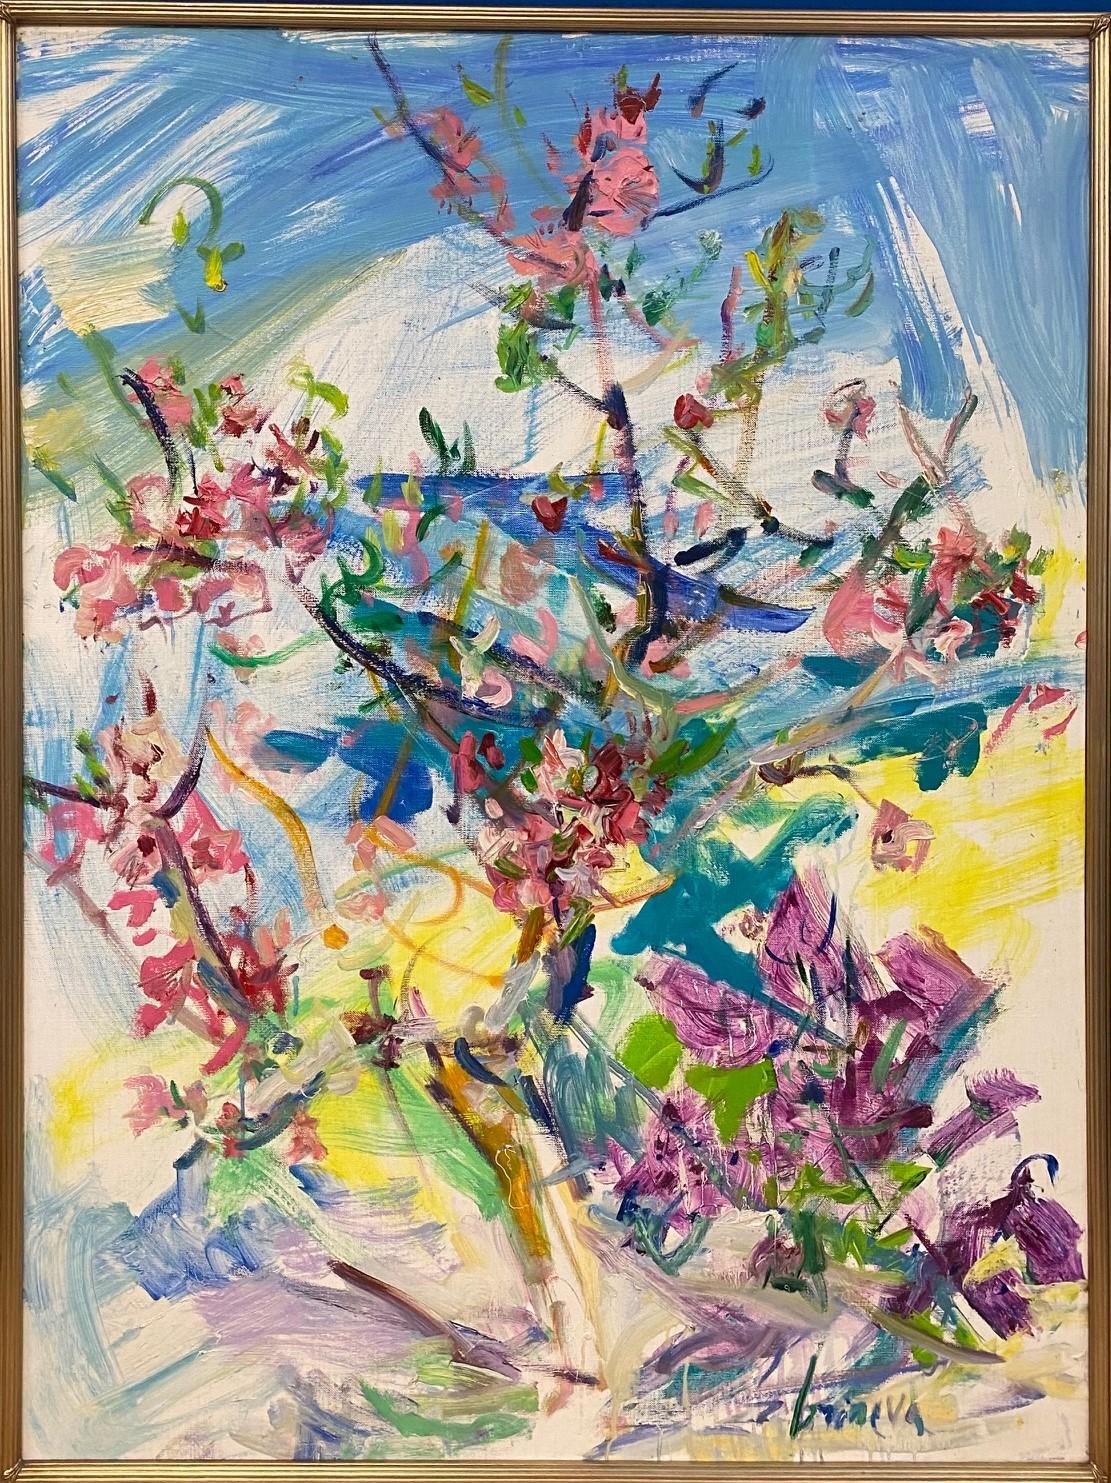 Cascading Flowers of Italy, 46x36 abstract expressionist floral landscape